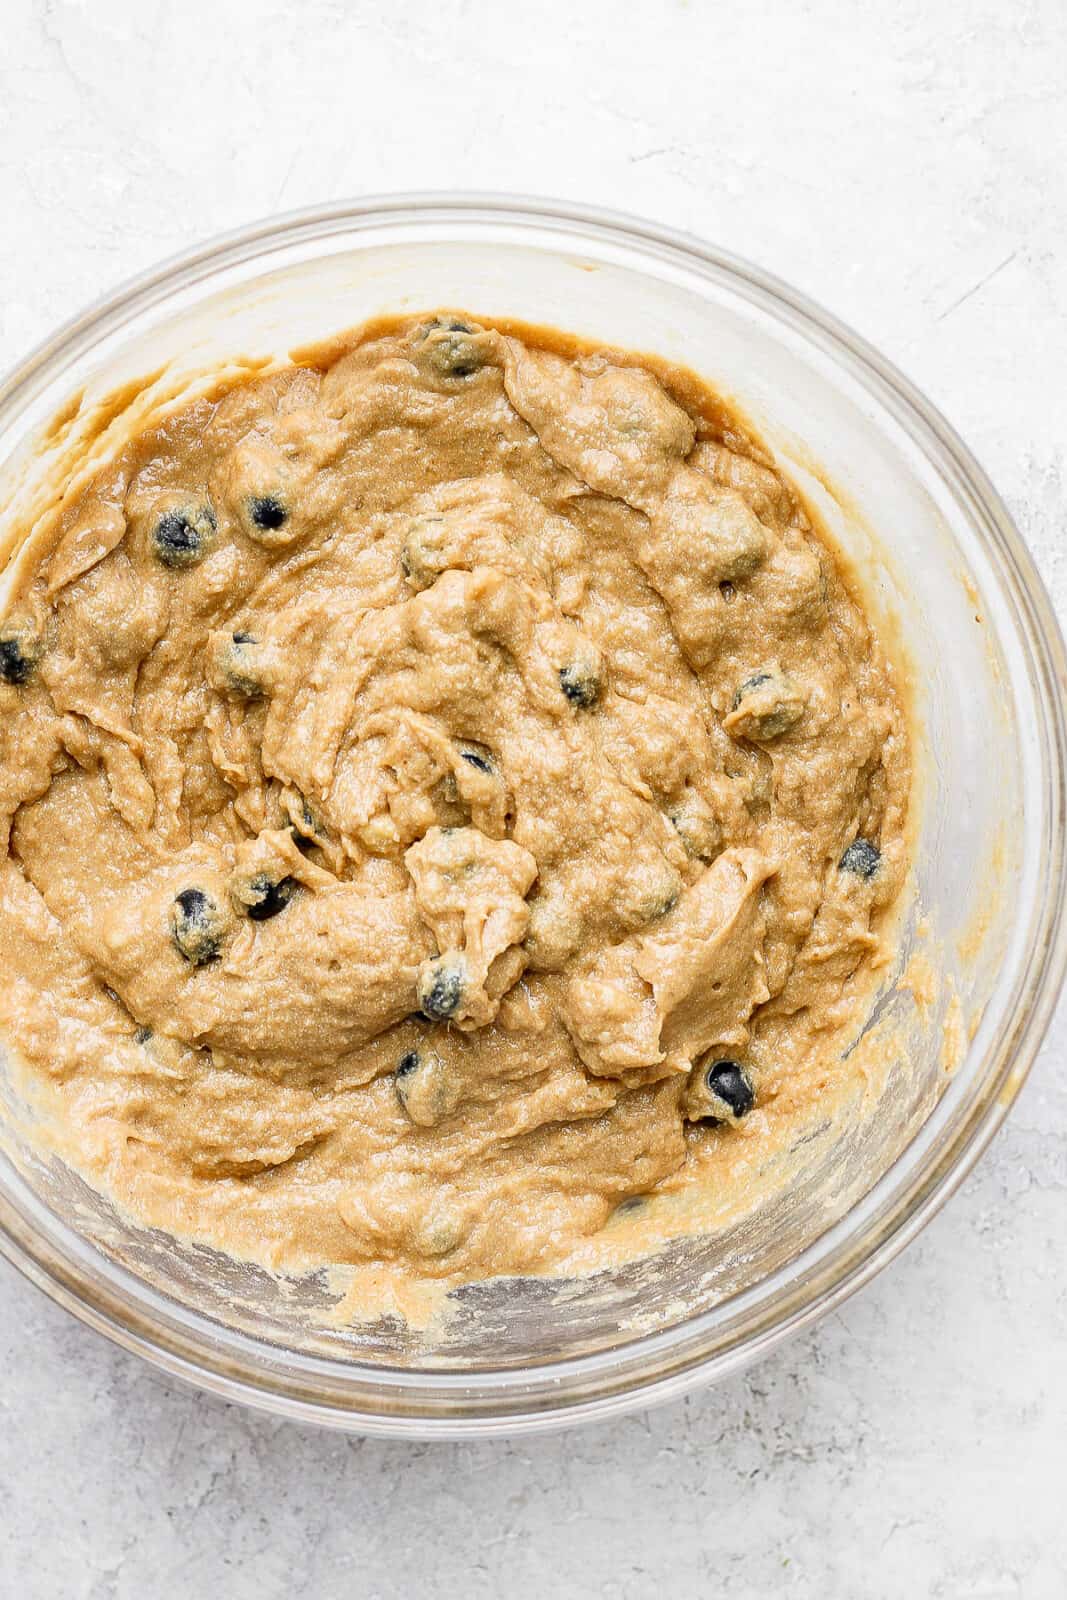 The blueberry banana muffin batter fully combined.